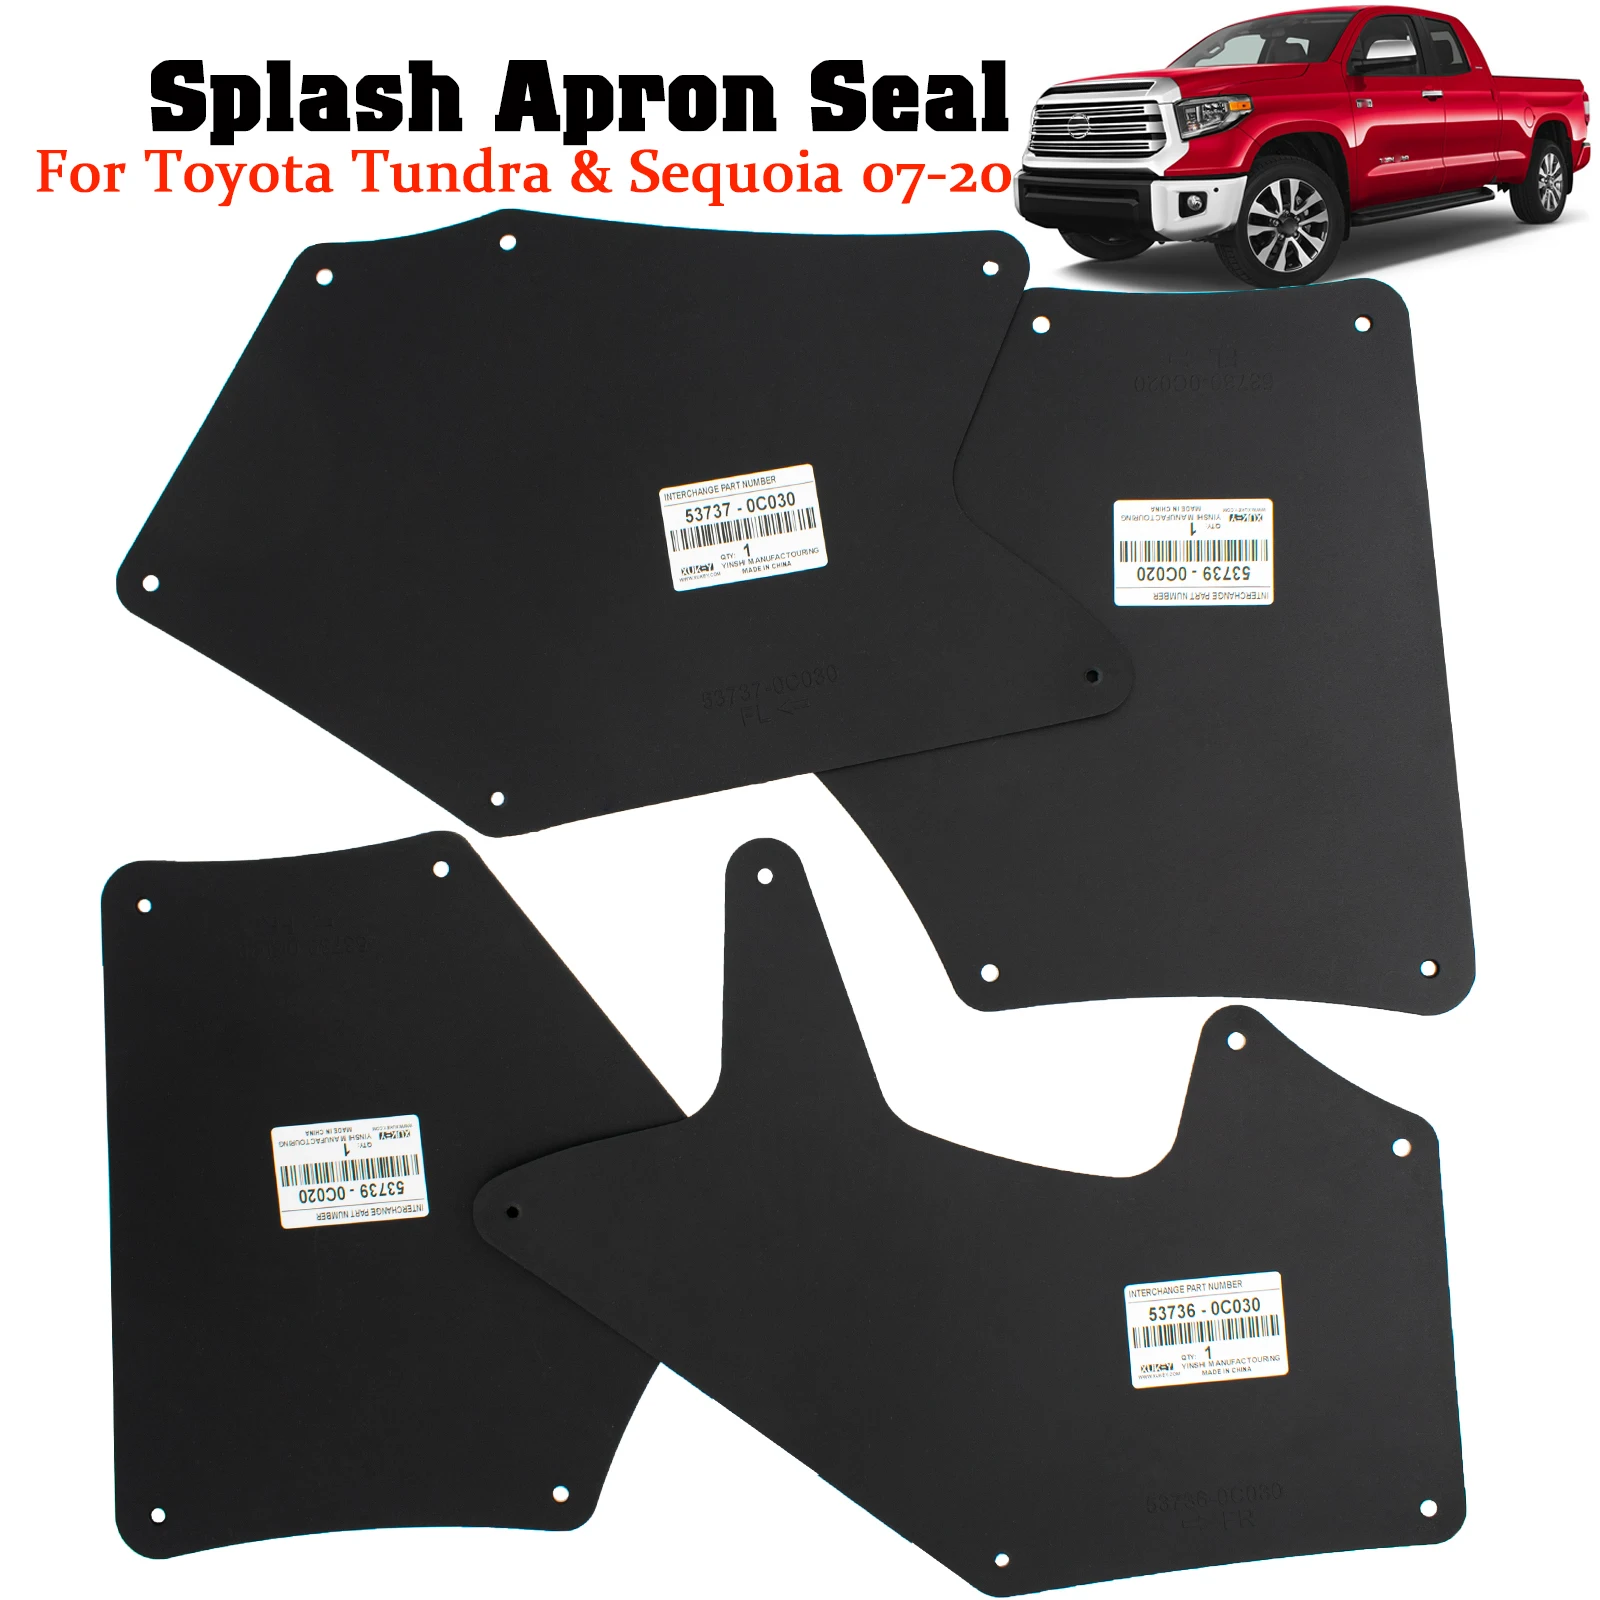 

Fender Liners Splash Shield for Toyota Tundra Sequoia 2007-2020 Apron Seal Mud Flaps Mudflaps Mudguards Guards Clips Retainer